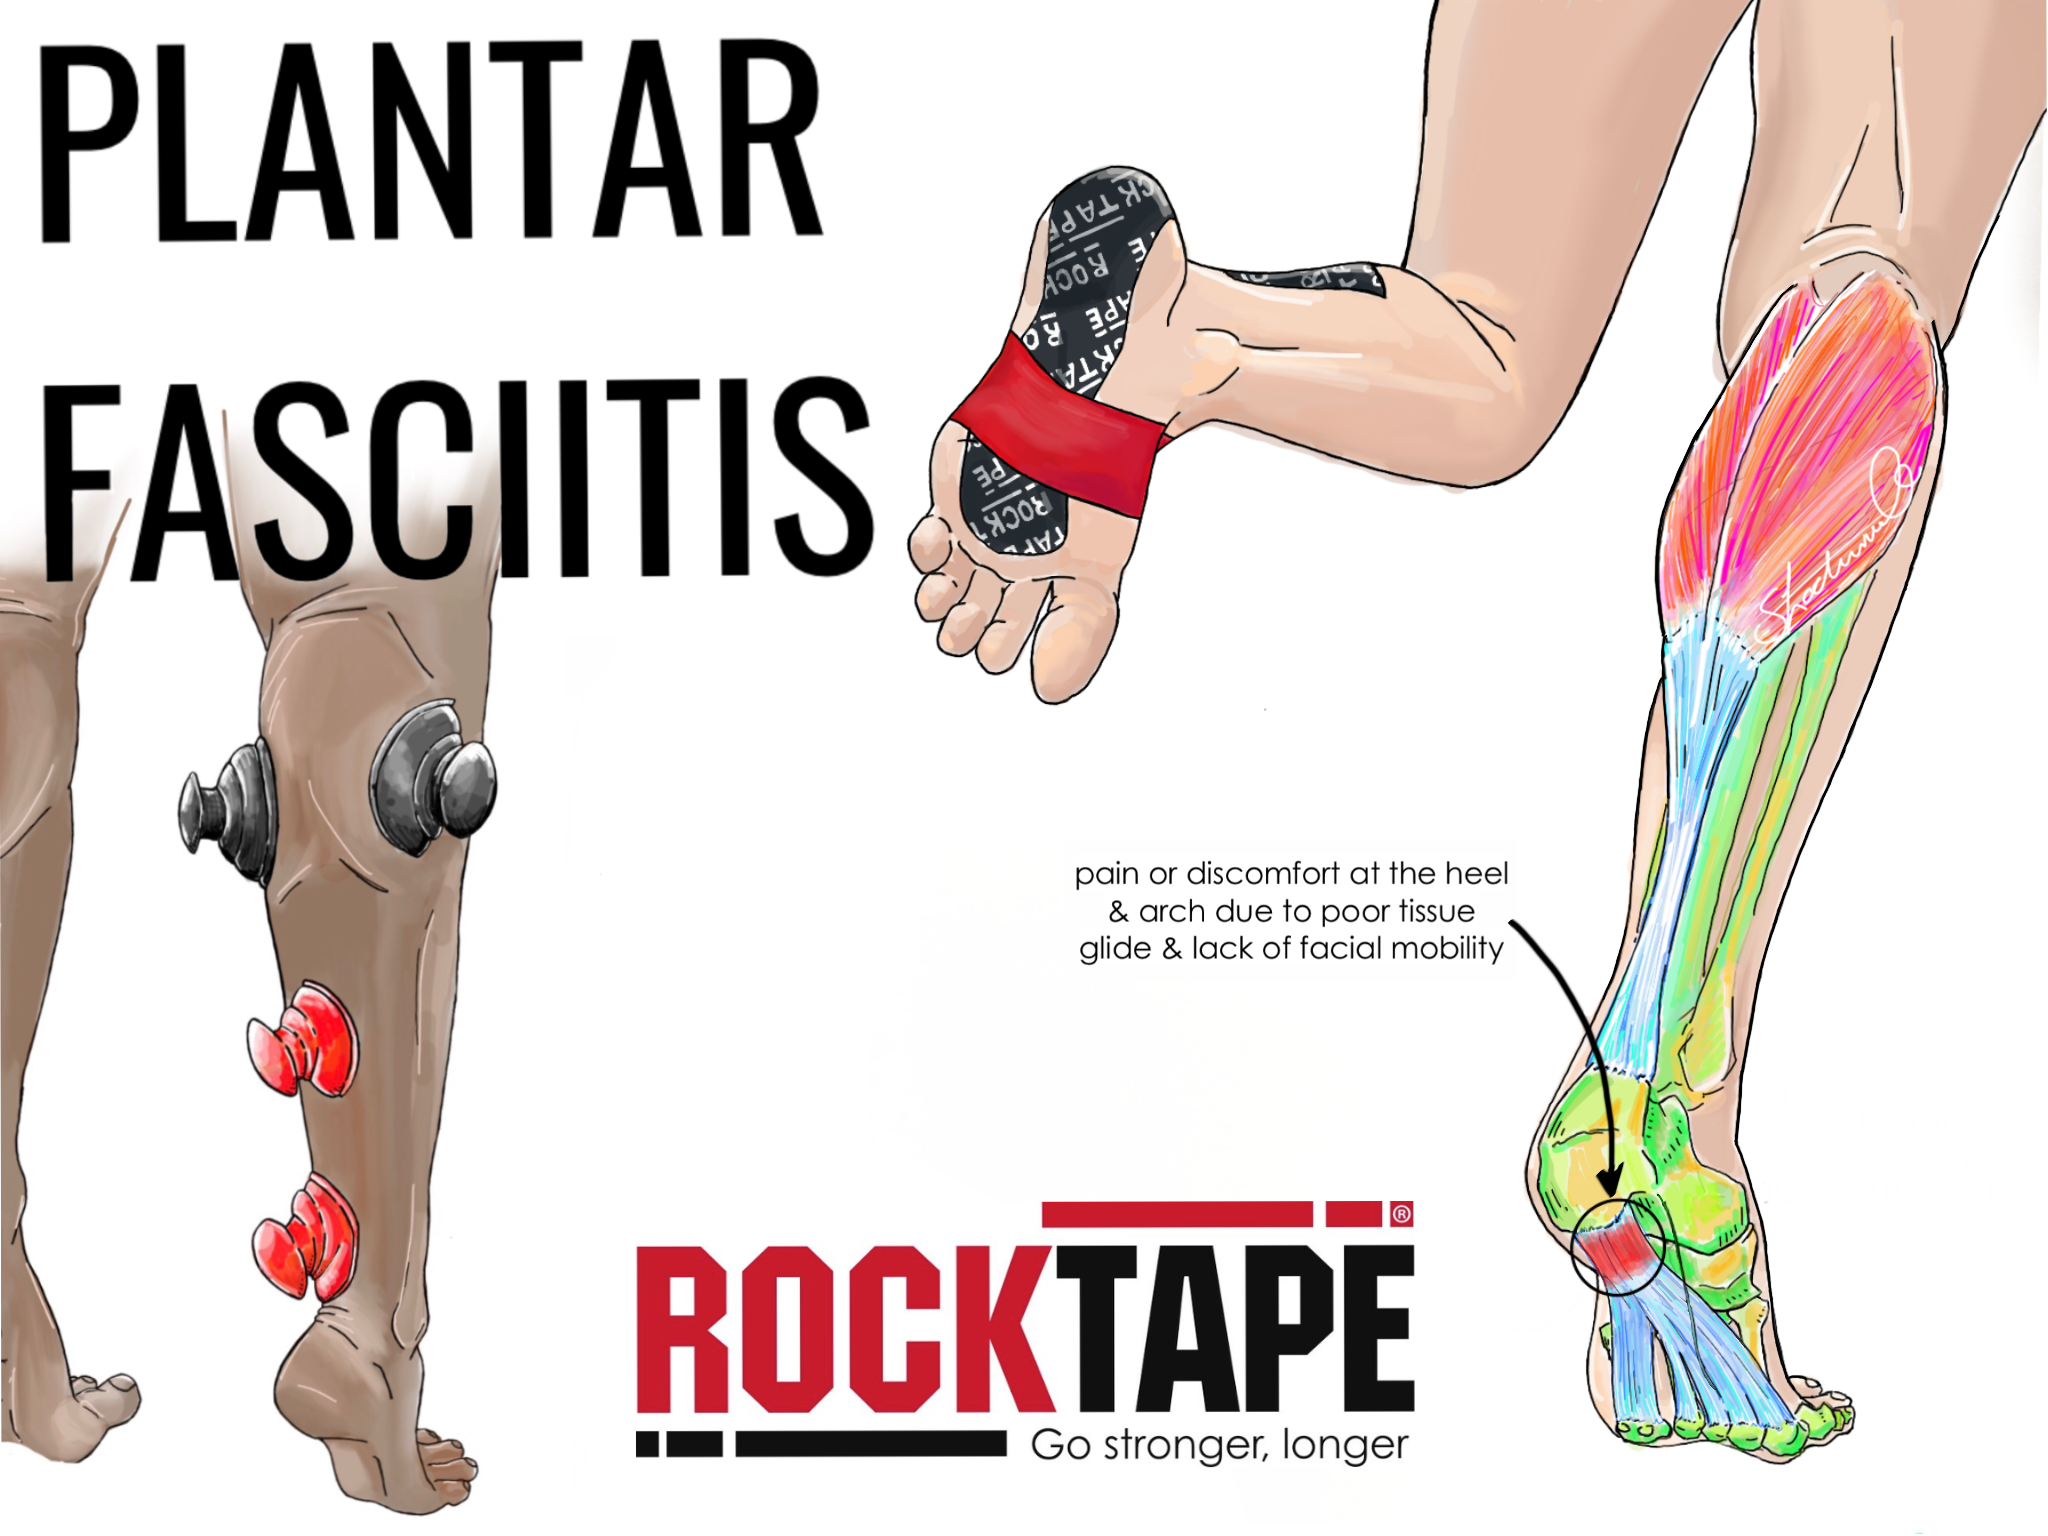 Treating Plantar Fasciitis with RockPods and RockTape